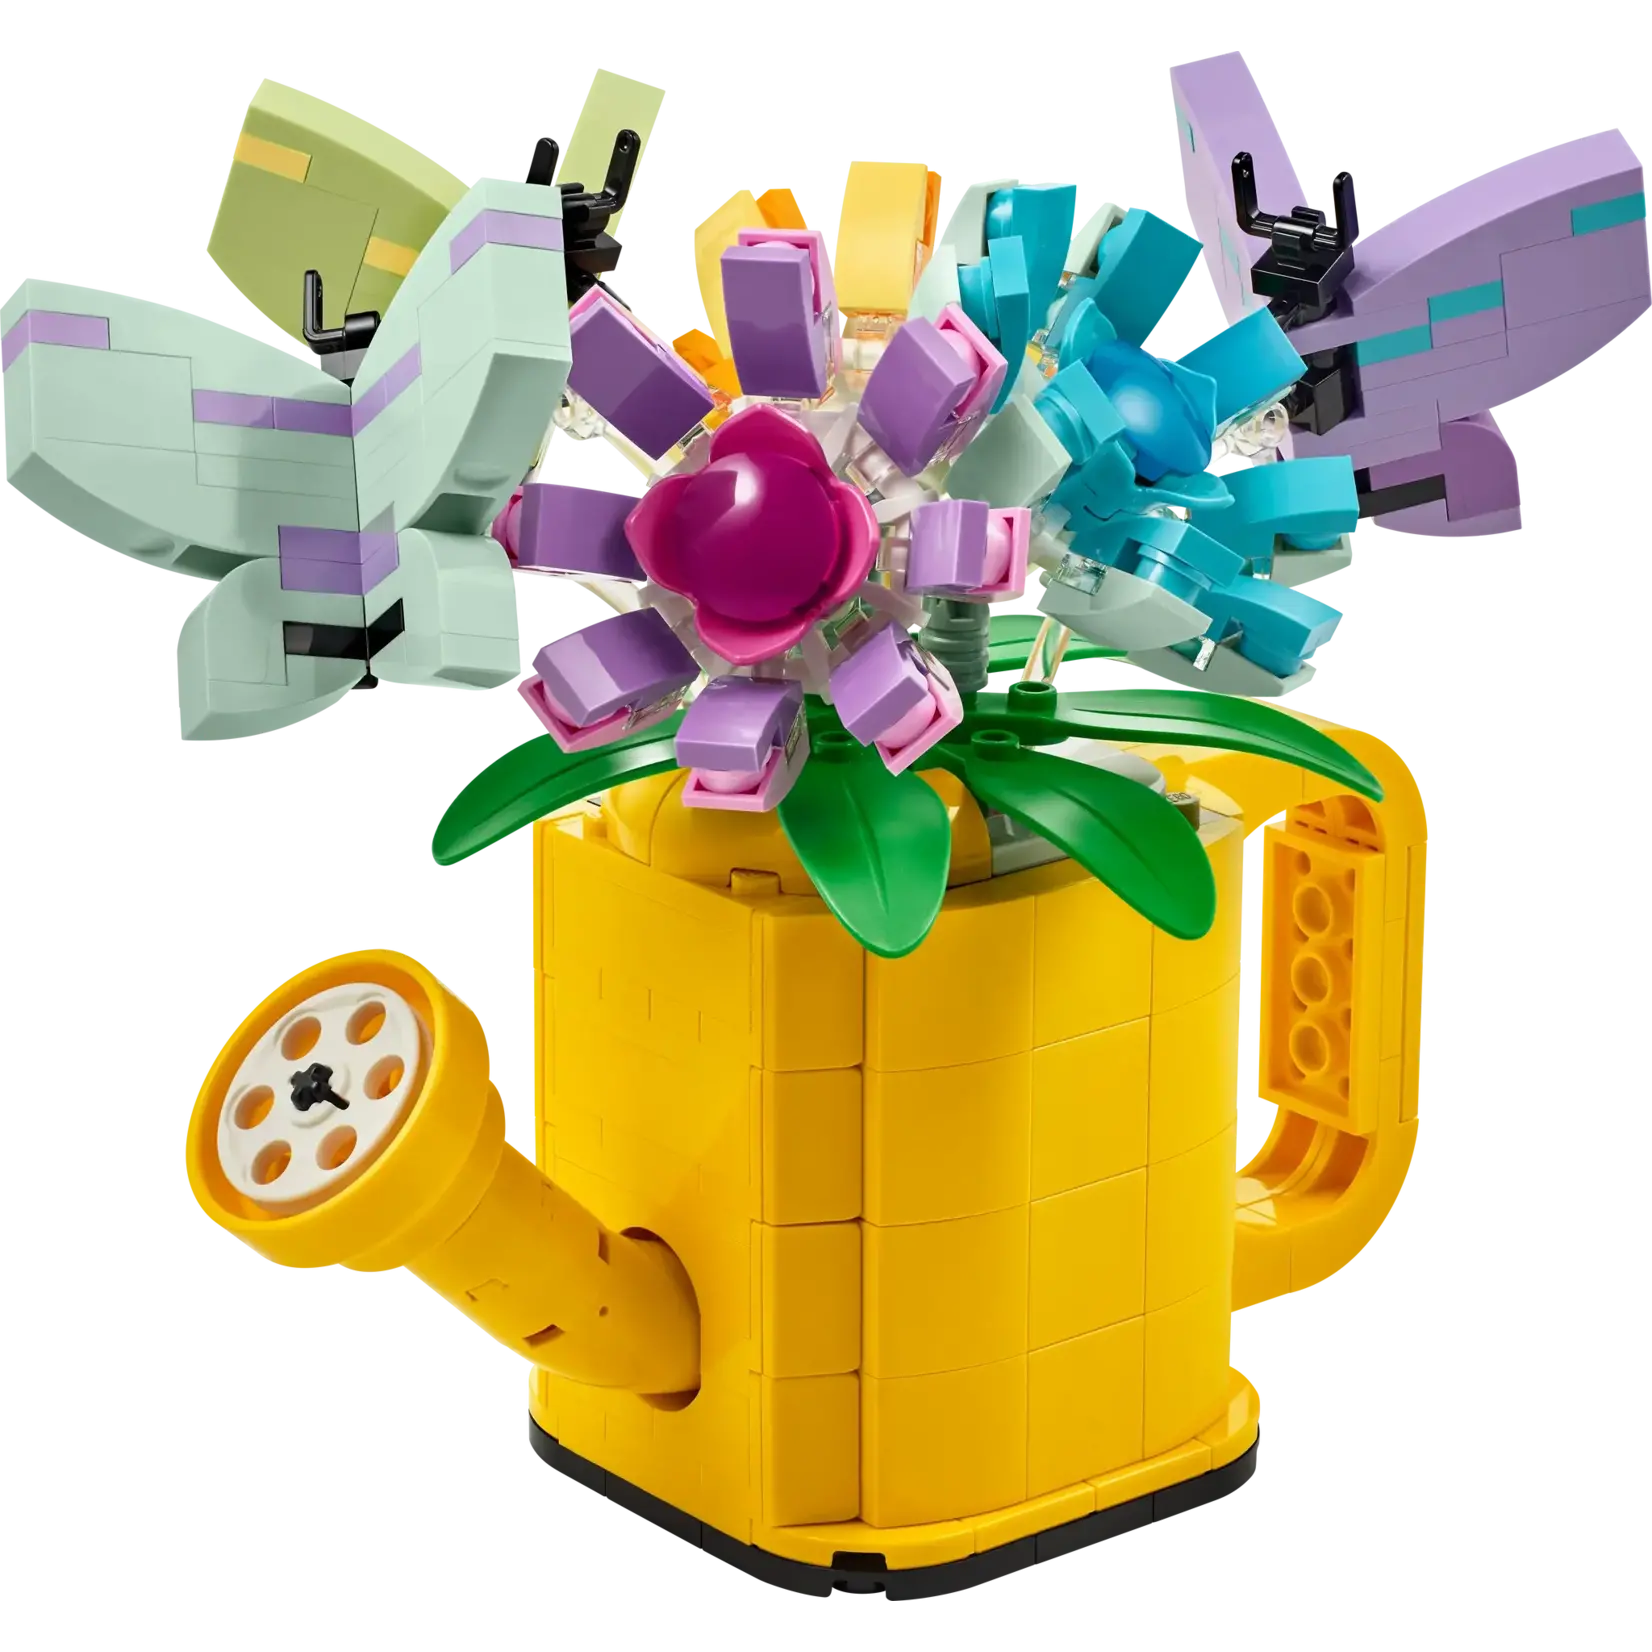 LEGO 31149 LEGO® Creator 3in1 Flowers in Watering Can